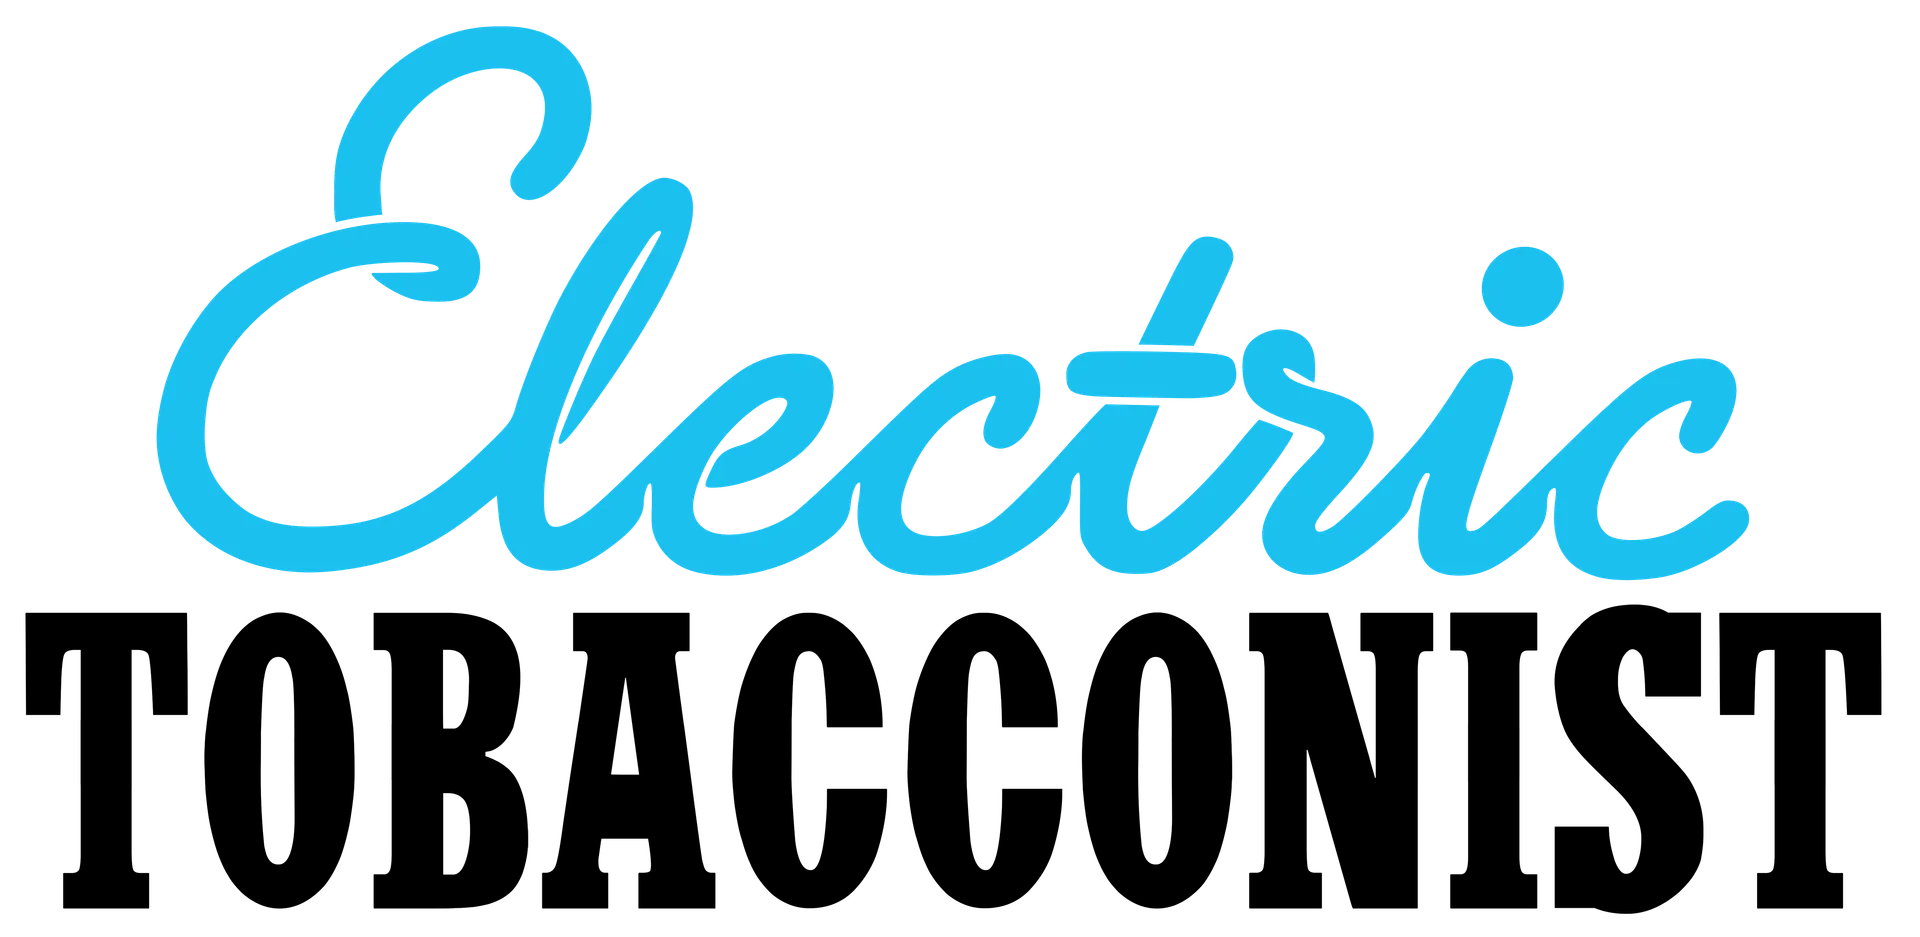 ELECTRIC TOBACCONIST logo. Current weekly ad